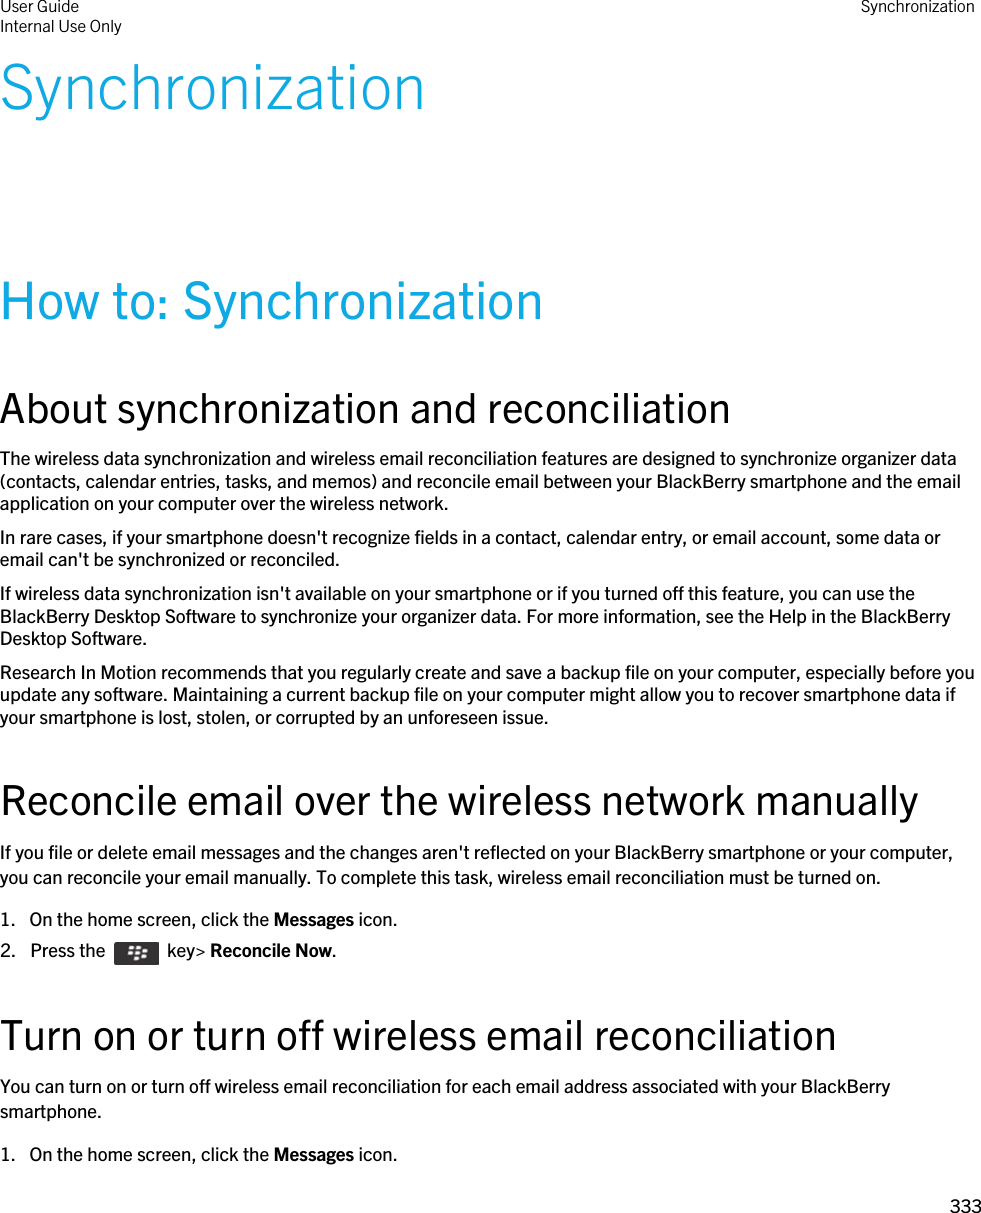 SynchronizationHow to: SynchronizationAbout synchronization and reconciliationThe wireless data synchronization and wireless email reconciliation features are designed to synchronize organizer data (contacts, calendar entries, tasks, and memos) and reconcile email between your BlackBerry smartphone and the email application on your computer over the wireless network.In rare cases, if your smartphone doesn&apos;t recognize fields in a contact, calendar entry, or email account, some data or email can&apos;t be synchronized or reconciled.If wireless data synchronization isn&apos;t available on your smartphone or if you turned off this feature, you can use the BlackBerry Desktop Software to synchronize your organizer data. For more information, see the Help in the BlackBerry Desktop Software.Research In Motion recommends that you regularly create and save a backup file on your computer, especially before you update any software. Maintaining a current backup file on your computer might allow you to recover smartphone data if your smartphone is lost, stolen, or corrupted by an unforeseen issue.Reconcile email over the wireless network manuallyIf you file or delete email messages and the changes aren&apos;t reflected on your BlackBerry smartphone or your computer, you can reconcile your email manually. To complete this task, wireless email reconciliation must be turned on.1. On the home screen, click the Messages icon.2.  Press the    key&gt; Reconcile Now.Turn on or turn off wireless email reconciliationYou can turn on or turn off wireless email reconciliation for each email address associated with your BlackBerry smartphone.1. On the home screen, click the Messages icon.User GuideInternal Use Only Synchronization333 